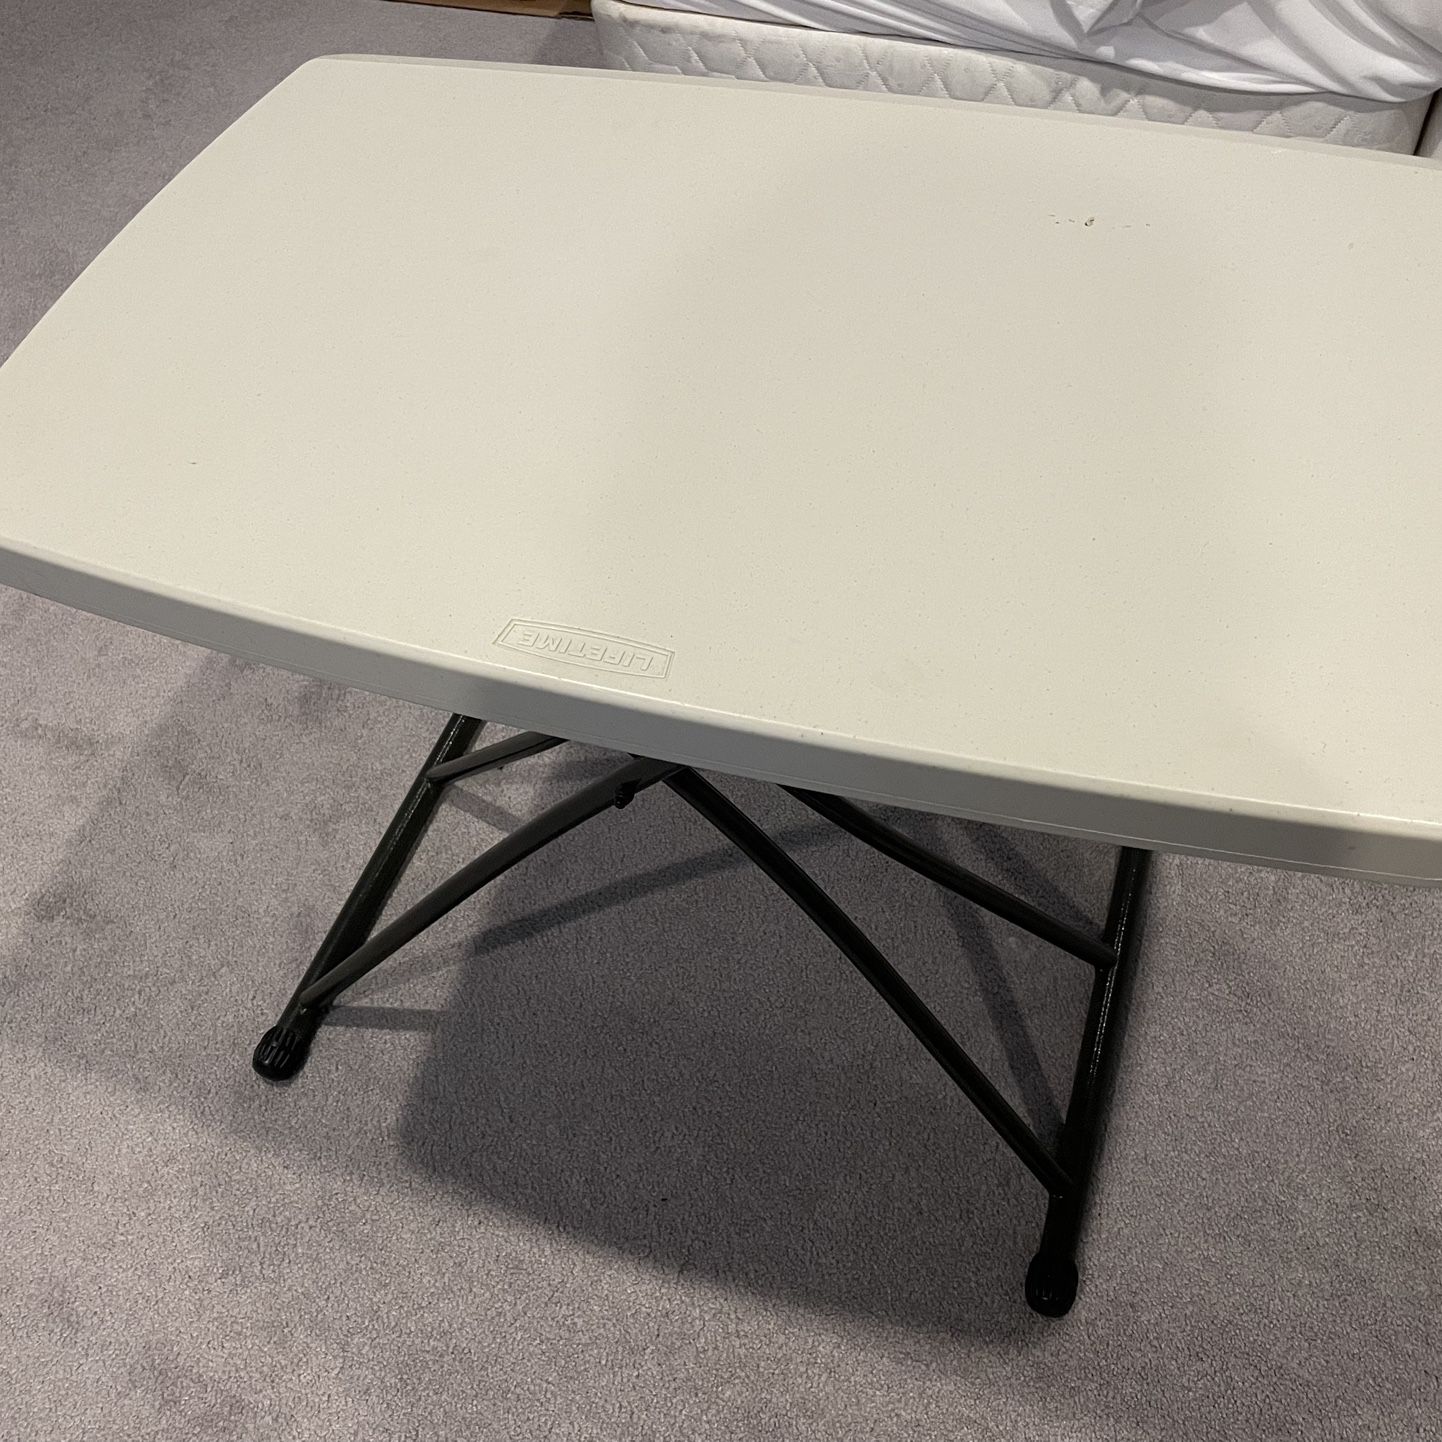 Small Personal Collapsible Table